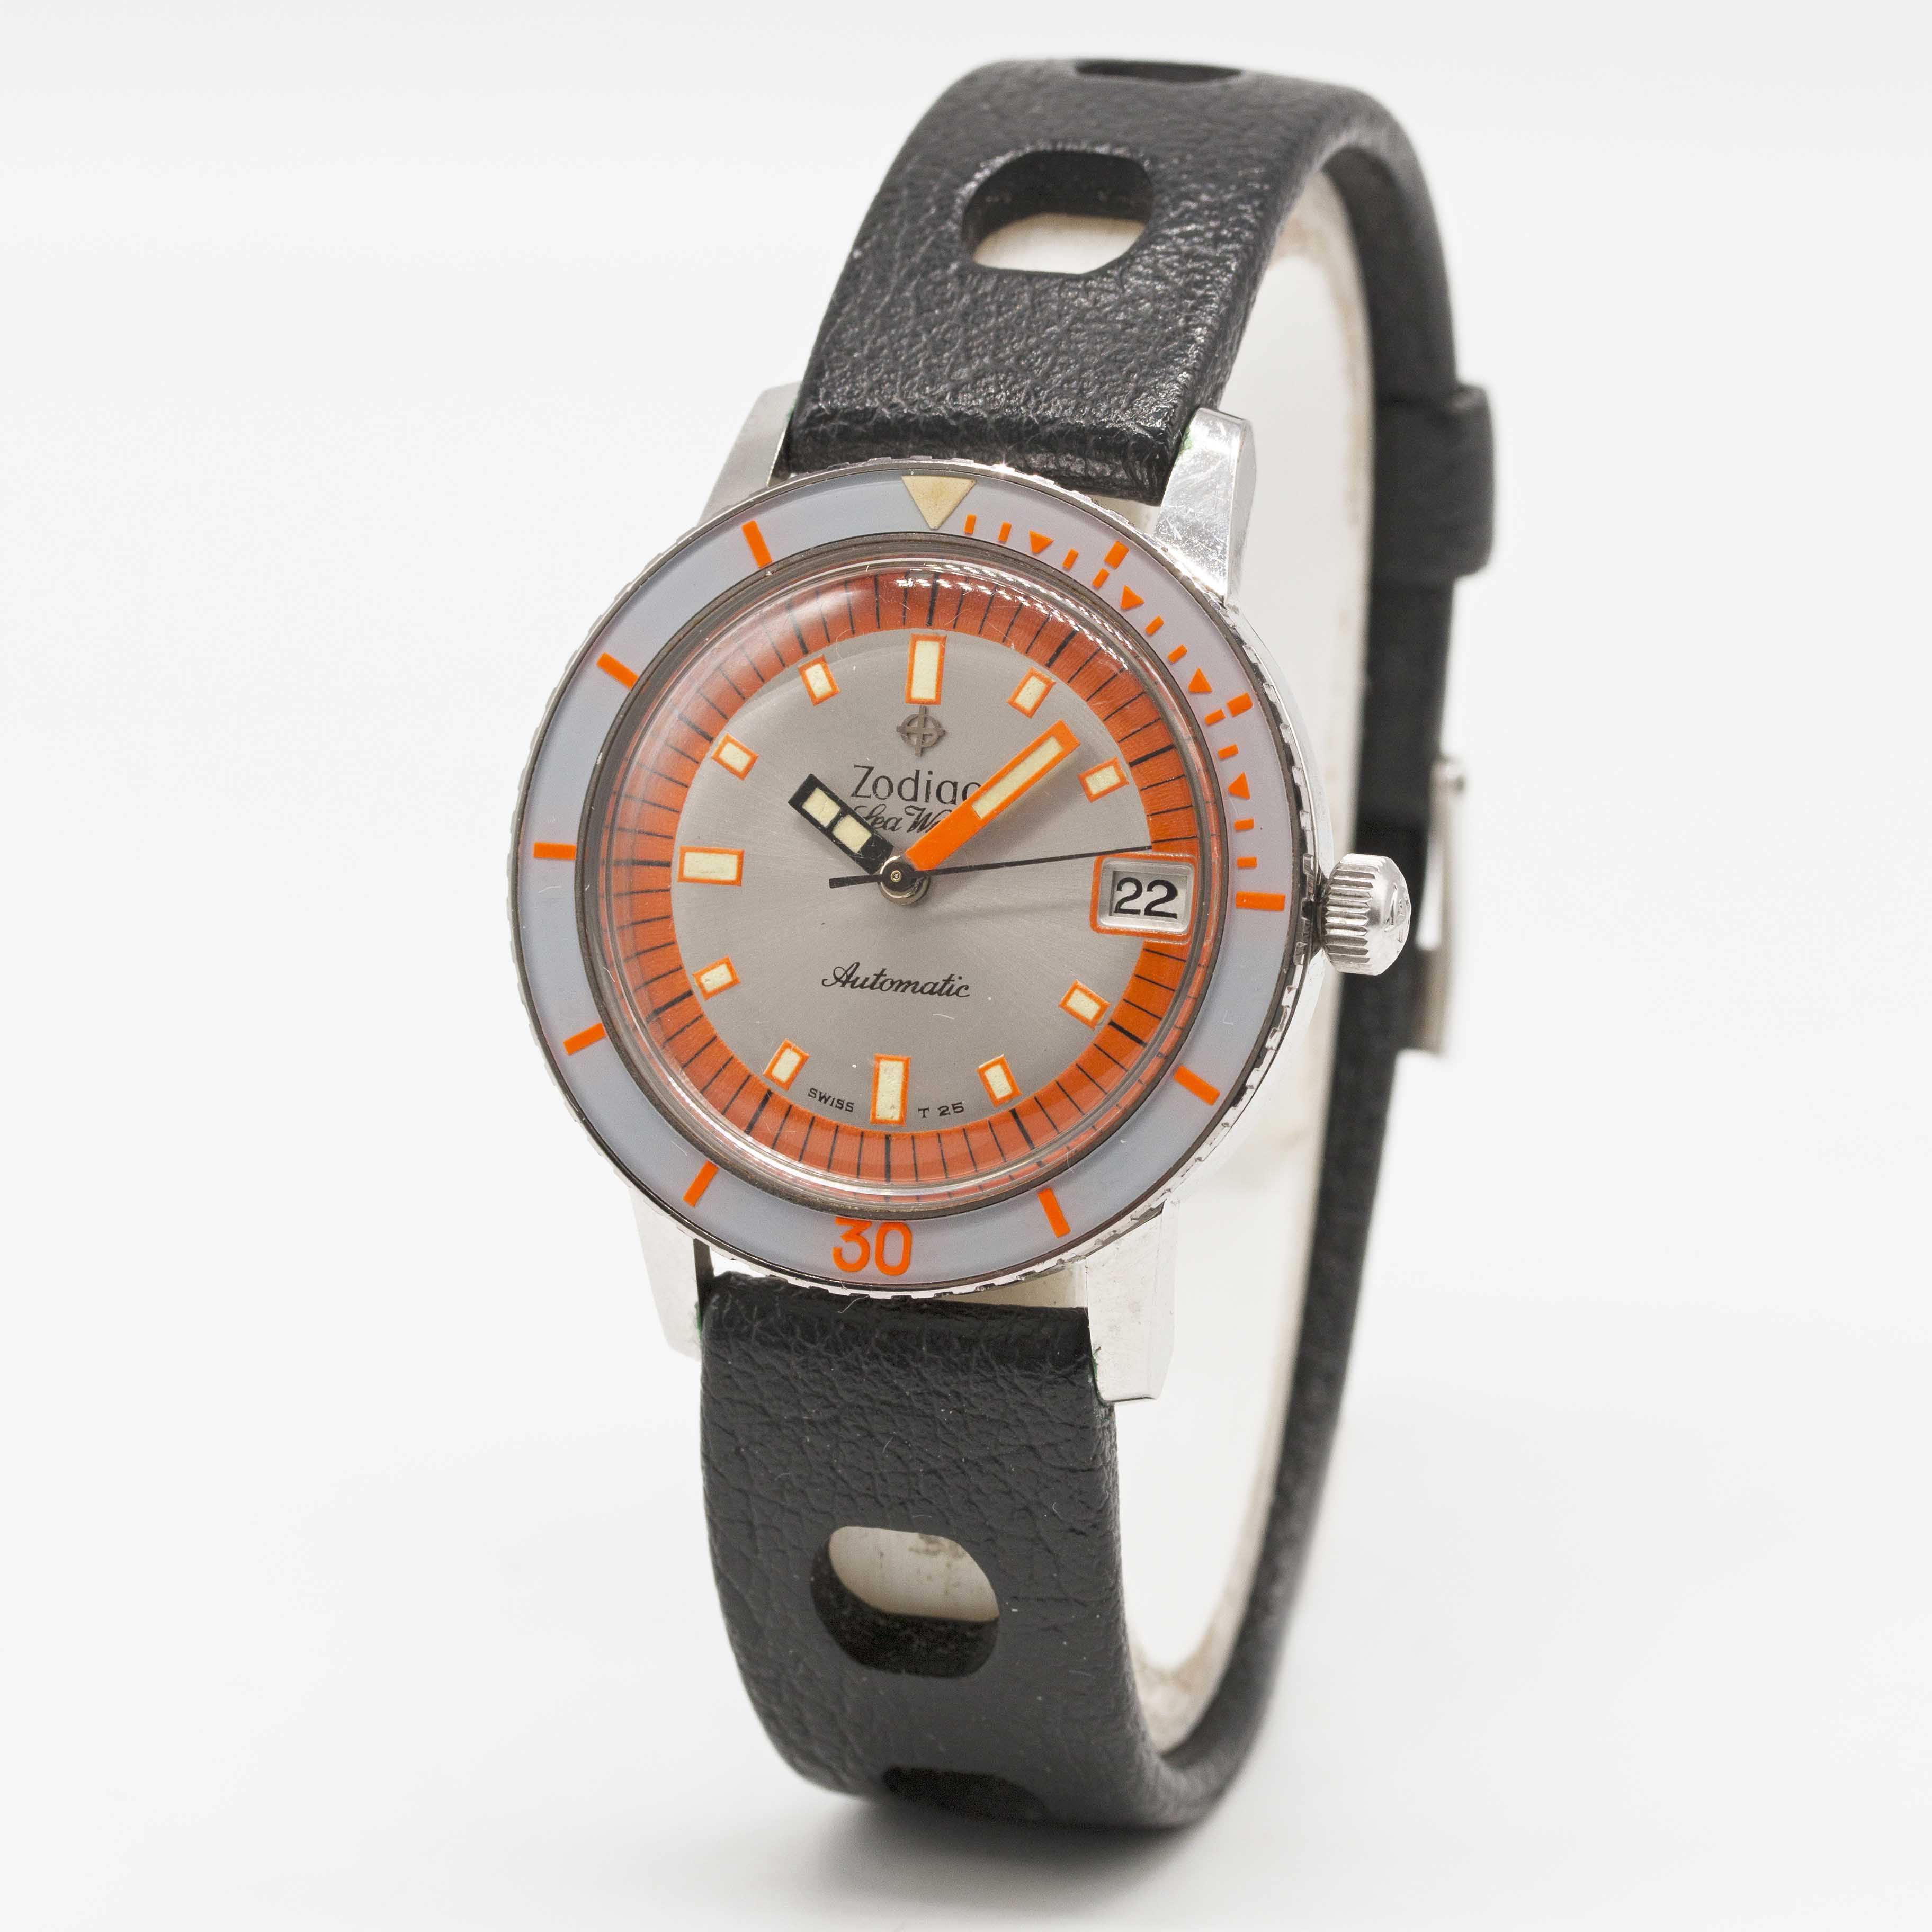 A GENTLEMAN'S STAINLESS STEEL ZODIAC SEA WOLF AUTOMATIC DIVERS WRIST WATCH CIRCA 1960s, REF. 722- - Image 3 of 5